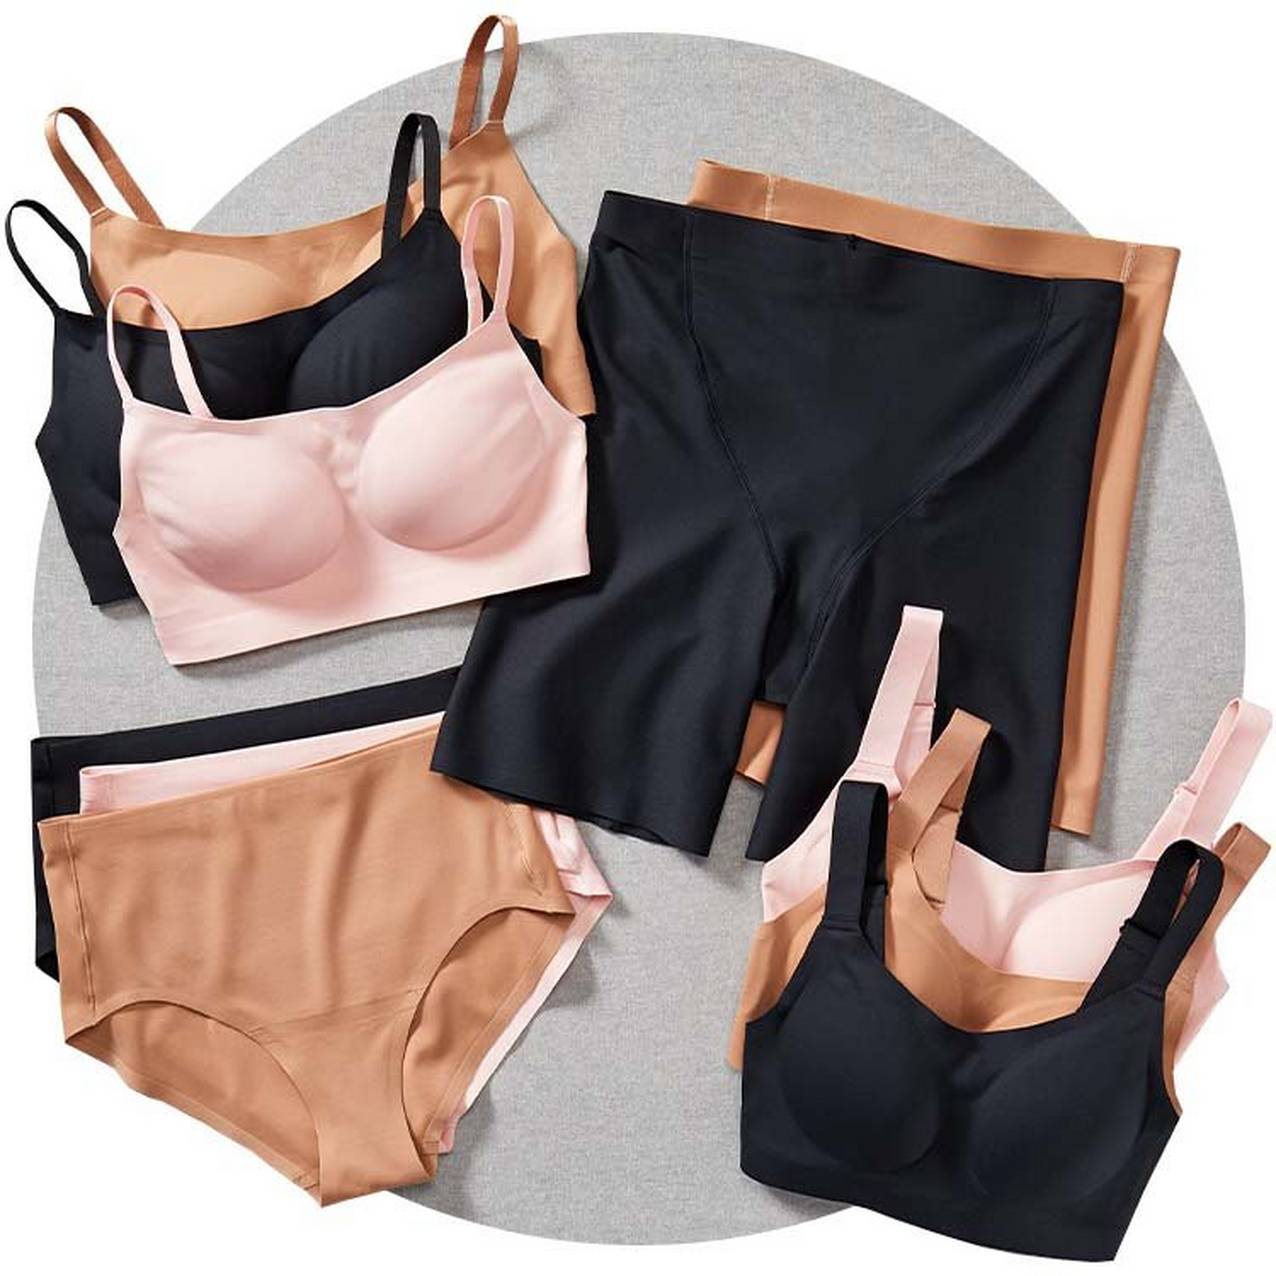 an array of women's line tamer bras, briefs, and boxer briefs in different colors